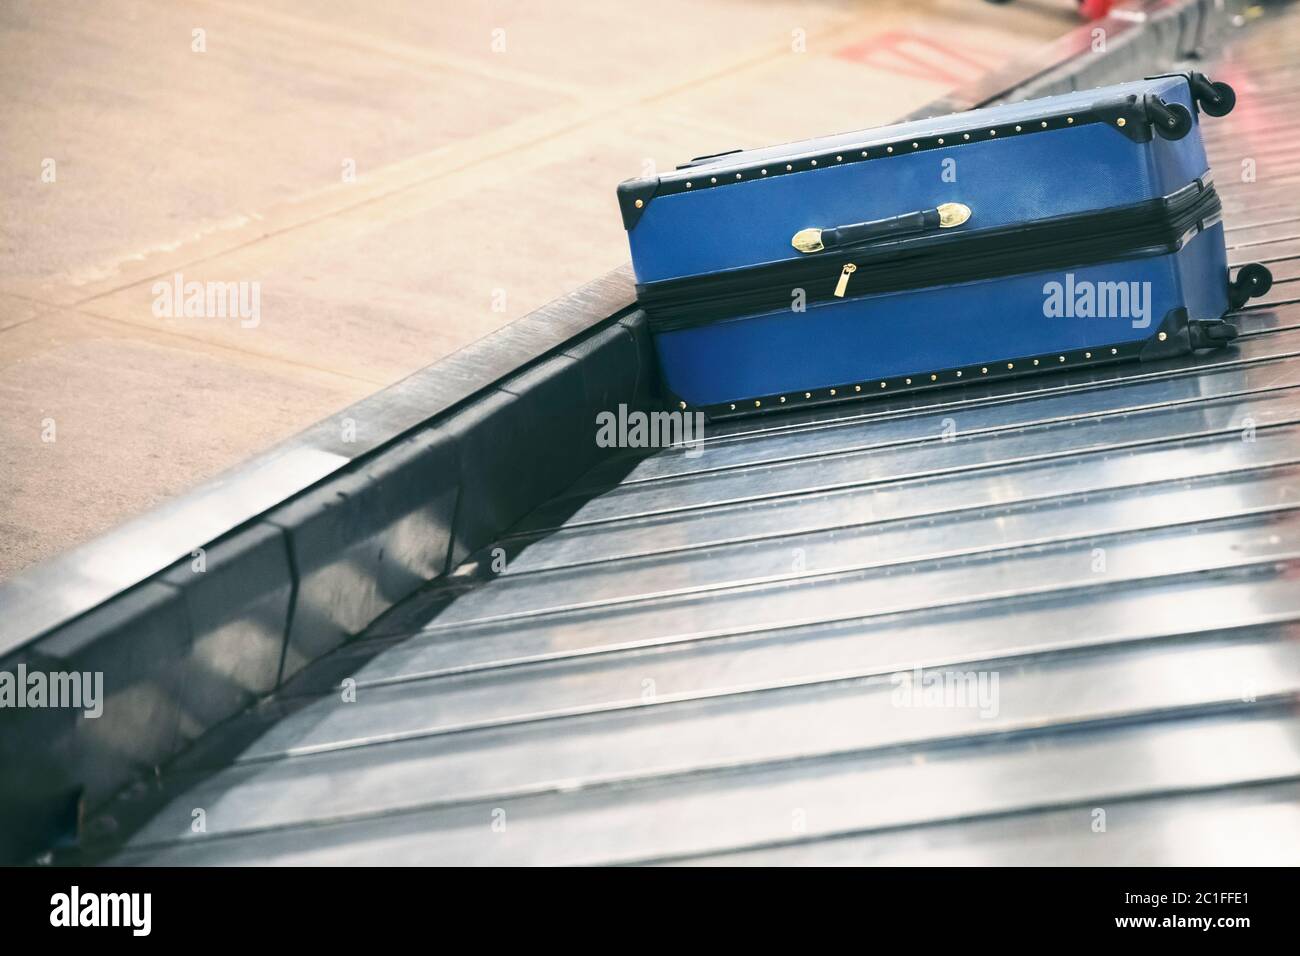 Suitcase on luggage conveyor belt at baggage claim area at airport terminal Stock Photo